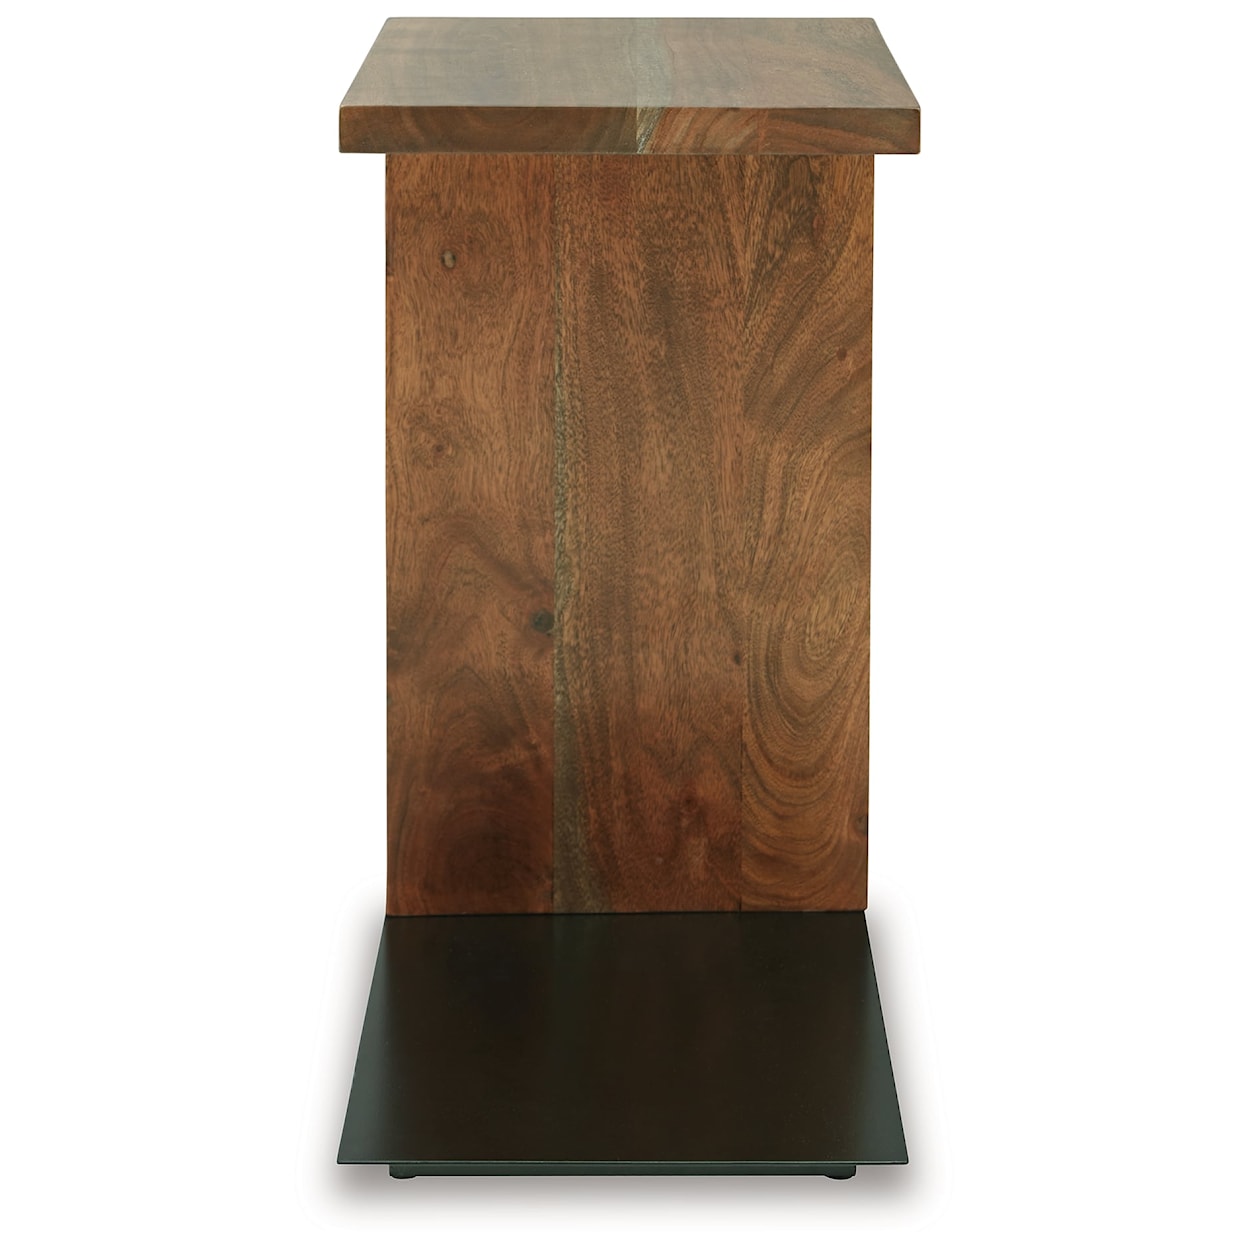 Signature Design by Ashley Furniture Wimshaw Accent Table